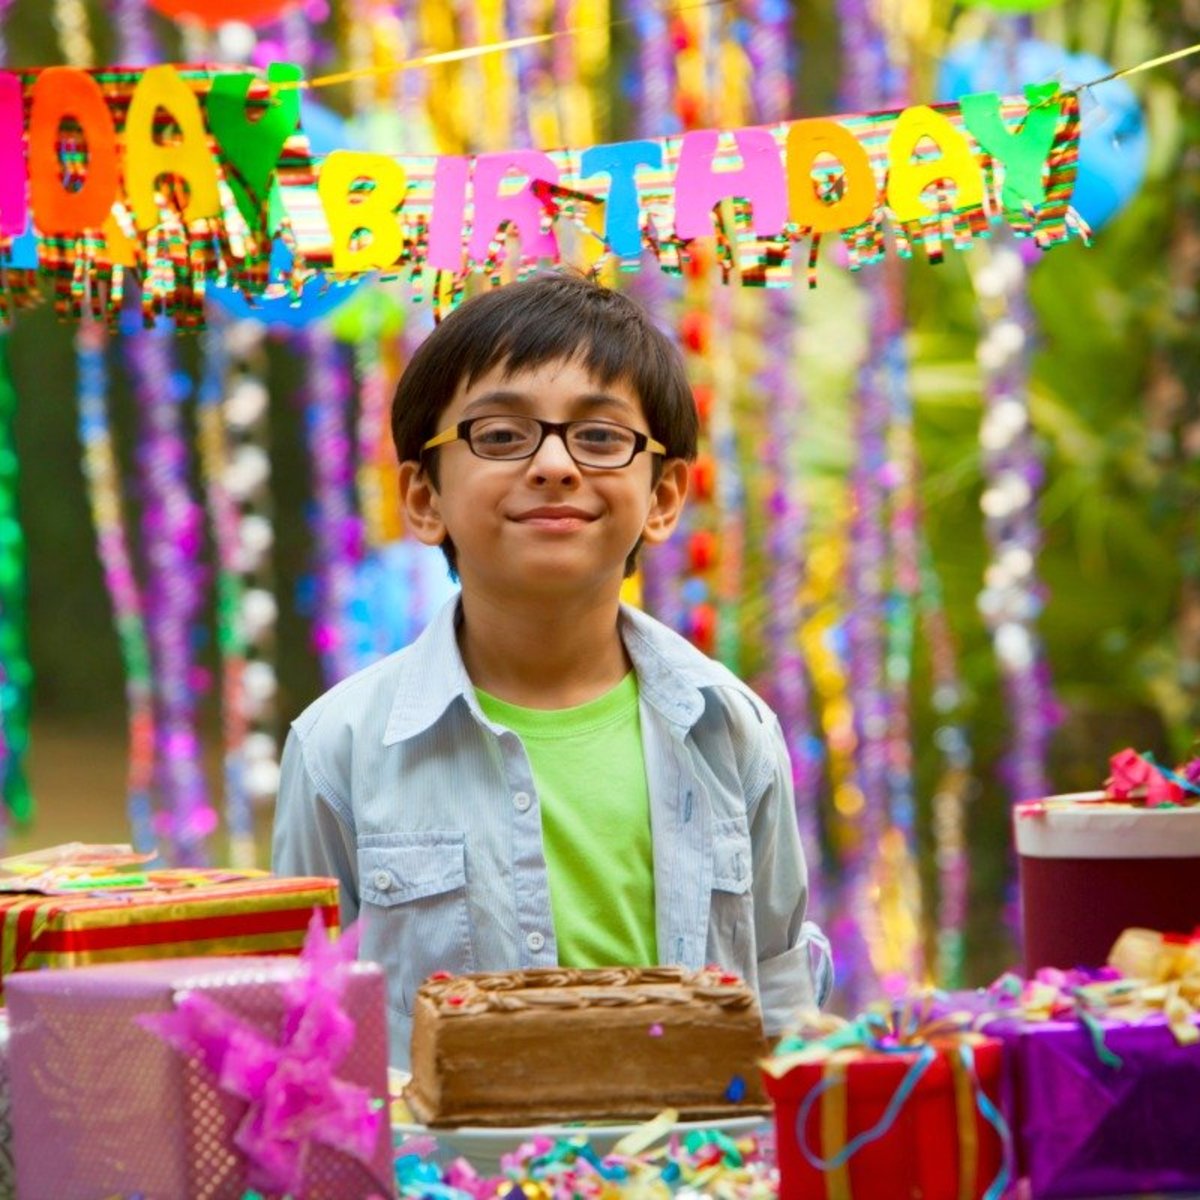 Cost of kids party: "I threw a $3000 birthday party for my 10-year-old":